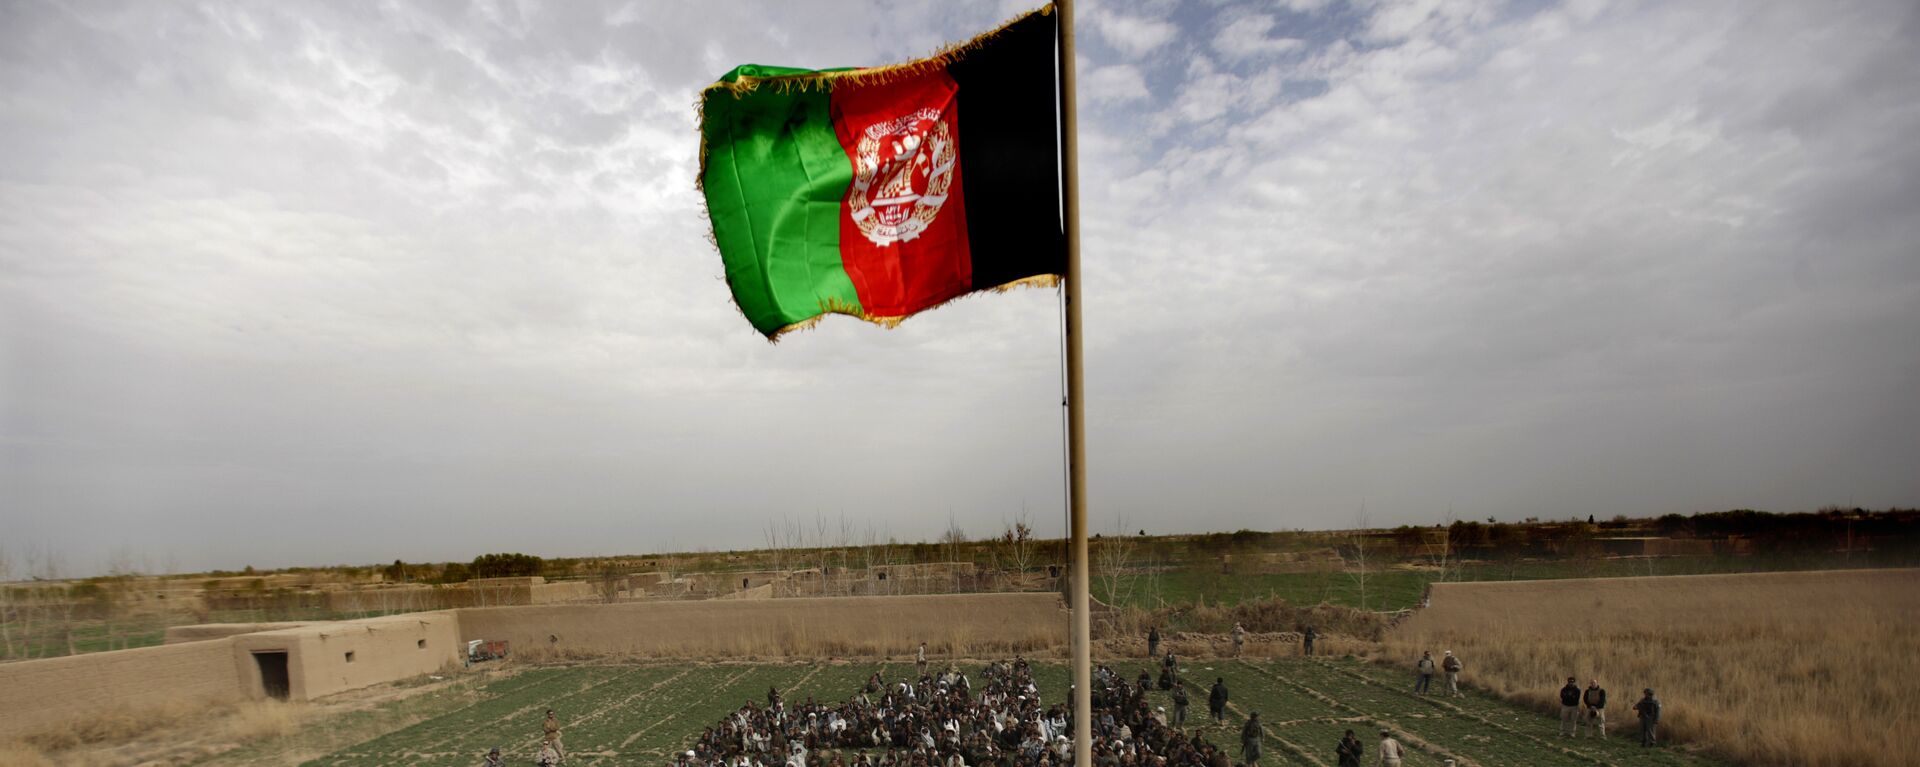 The Afghan national flag is hoisted during an official flag raising ceremony in Marjah on February 25, 2010. - Sputnik Mundo, 1920, 02.11.2021